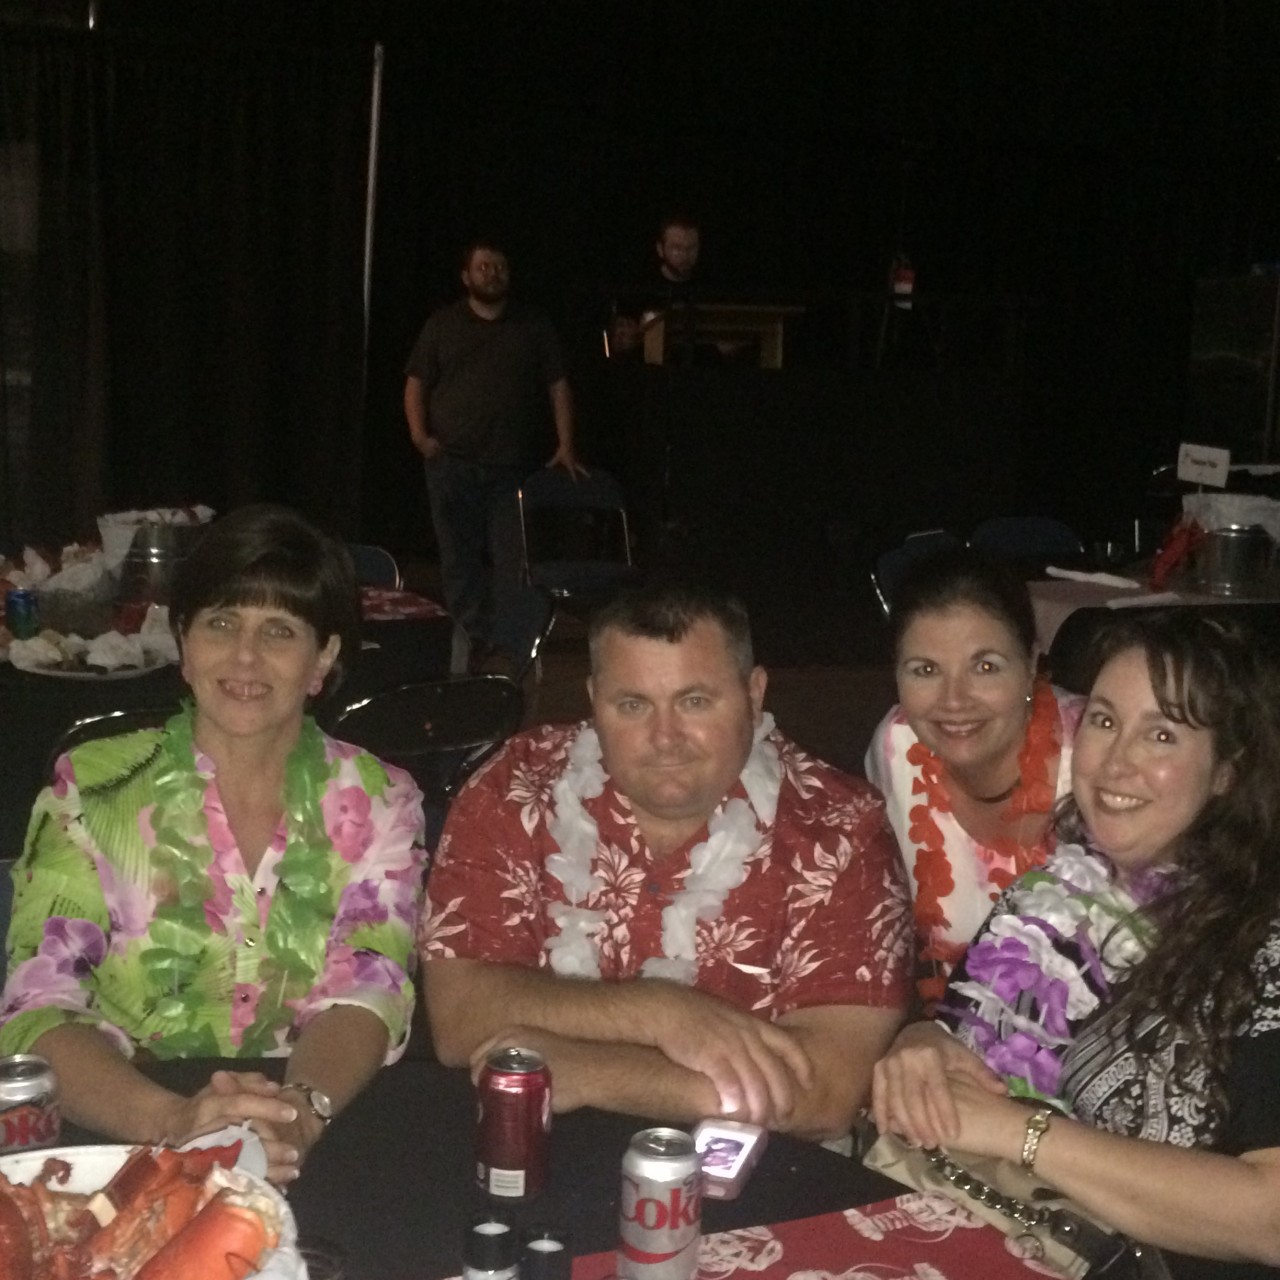 Beaumont Chamber LobsterFest 2015!